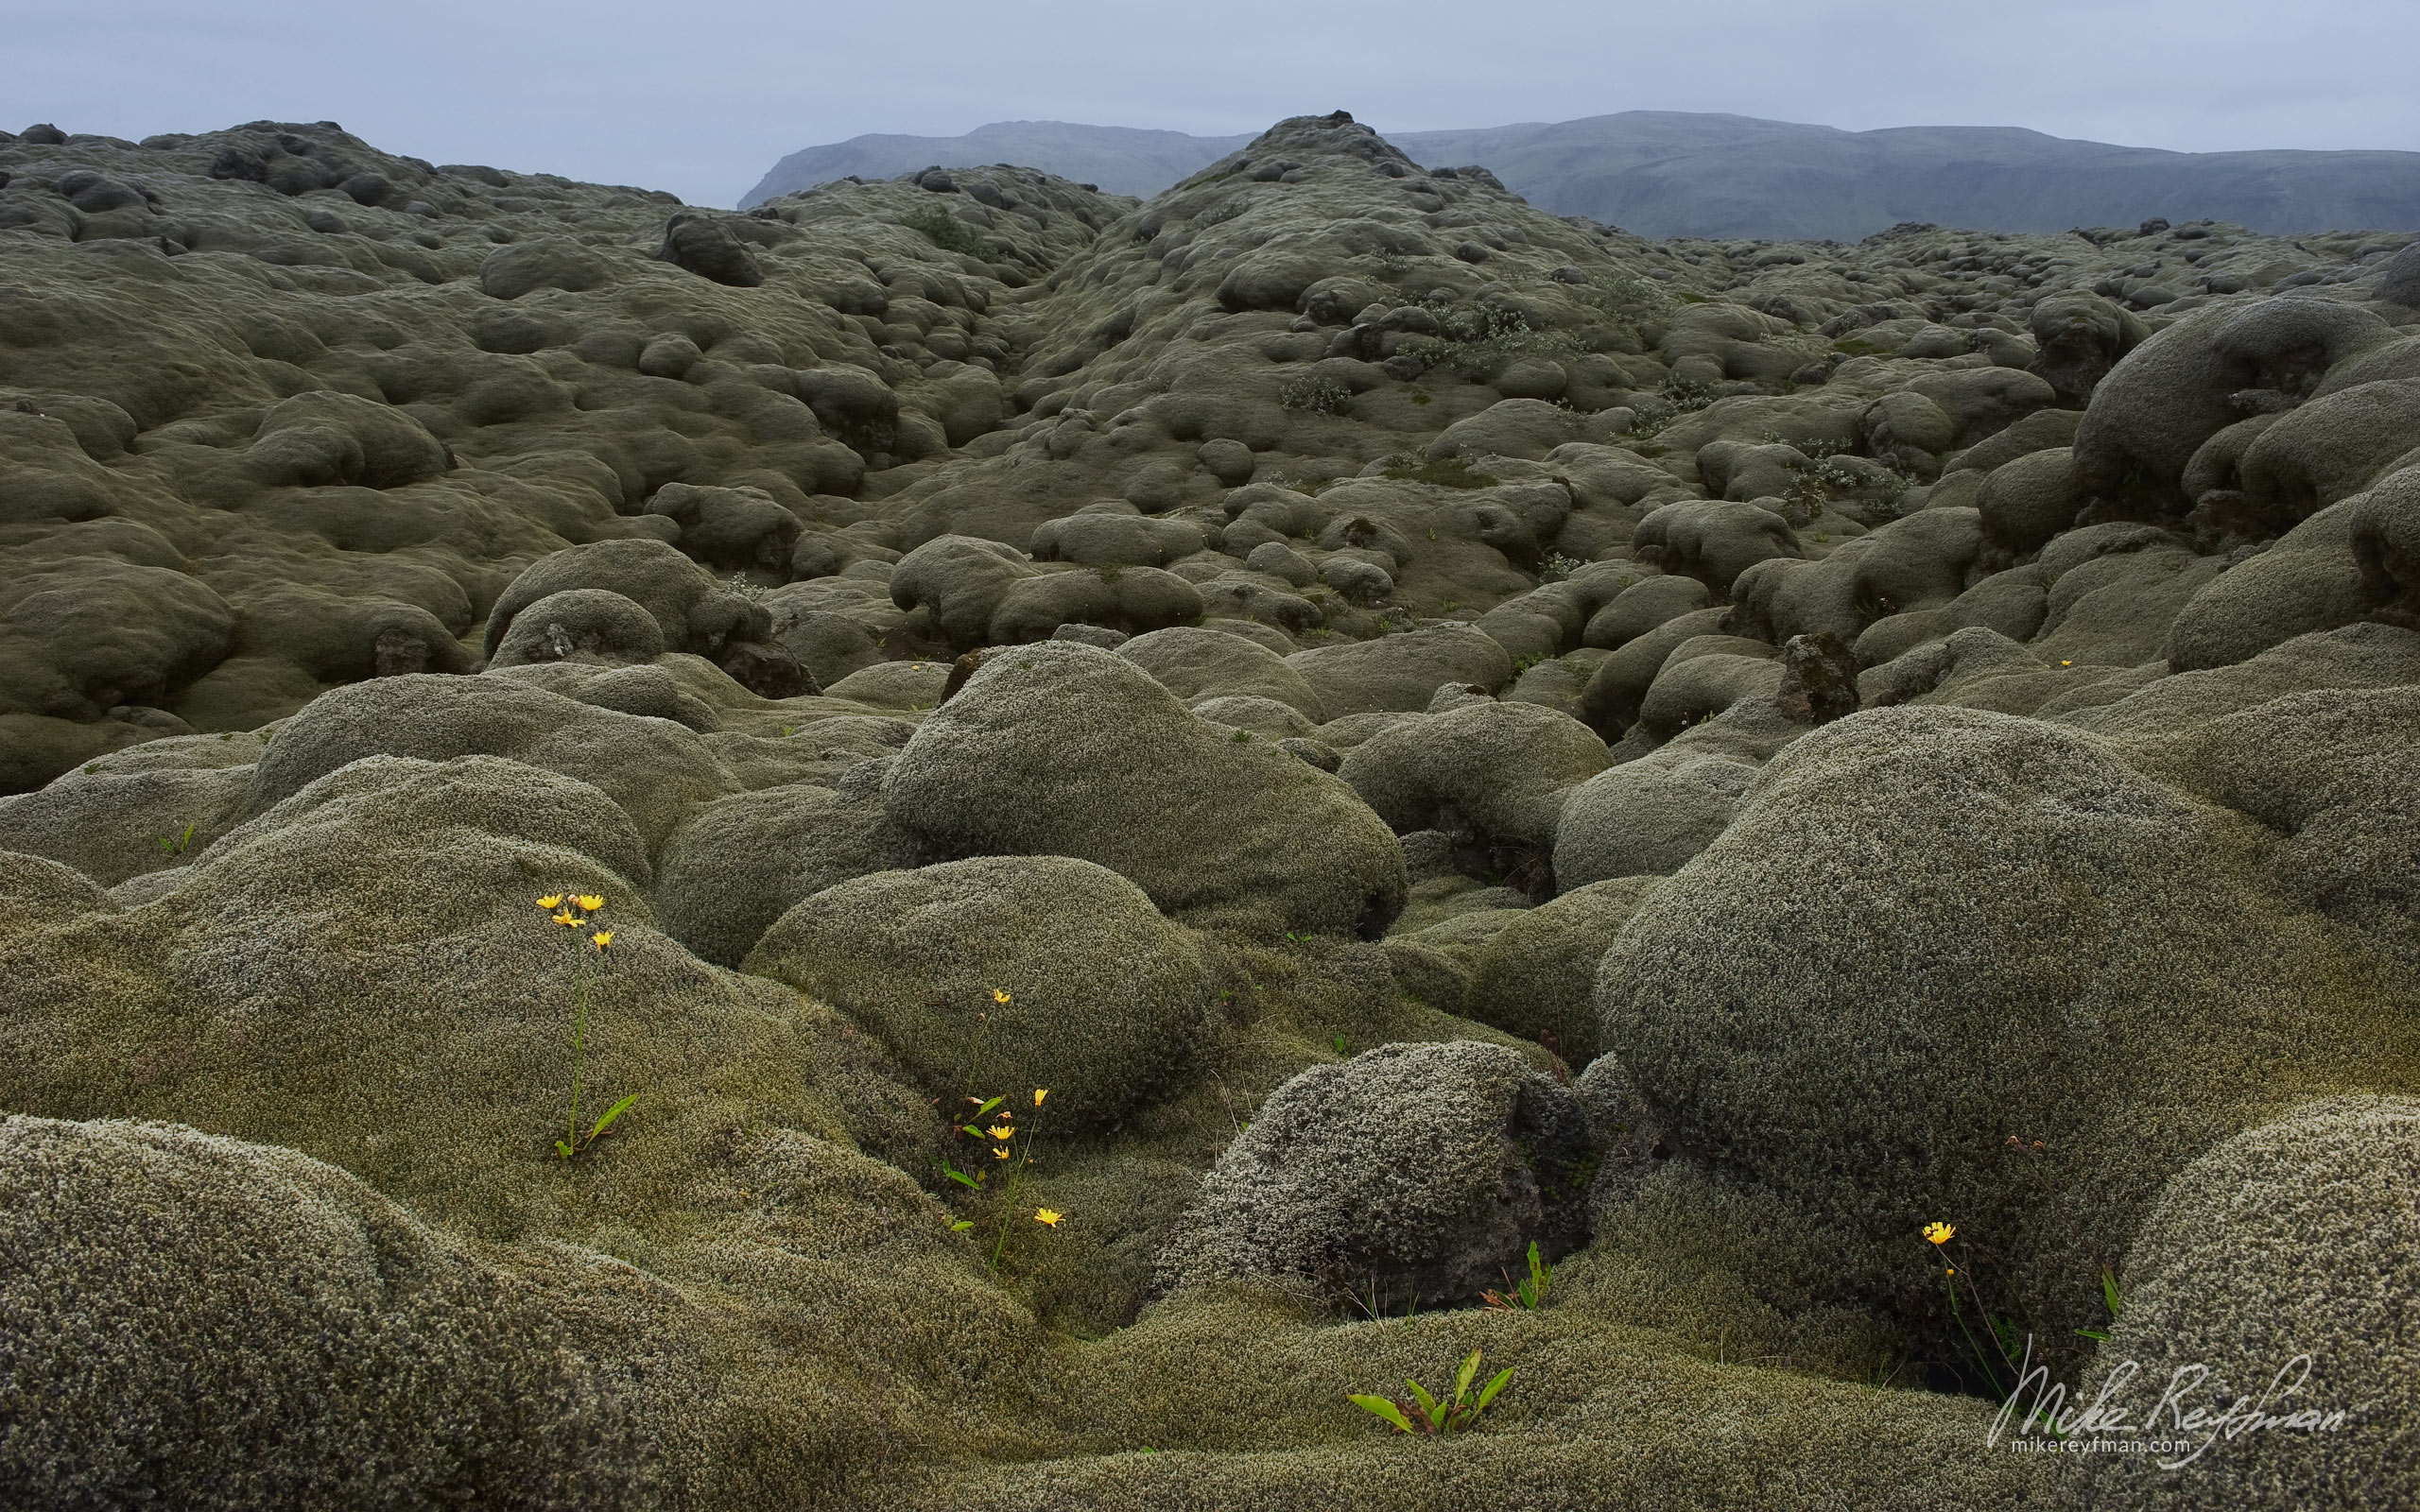 Lava covered in moss. Eldhraun Lava Field, South Iceland. 083-IC-GP _MR28468 - Rhyolite Mountains, Crater Lakes, Geothermal Areas, Lava Fields and Glacial Rivers. Iceland.  - Mike Reyfman Photography